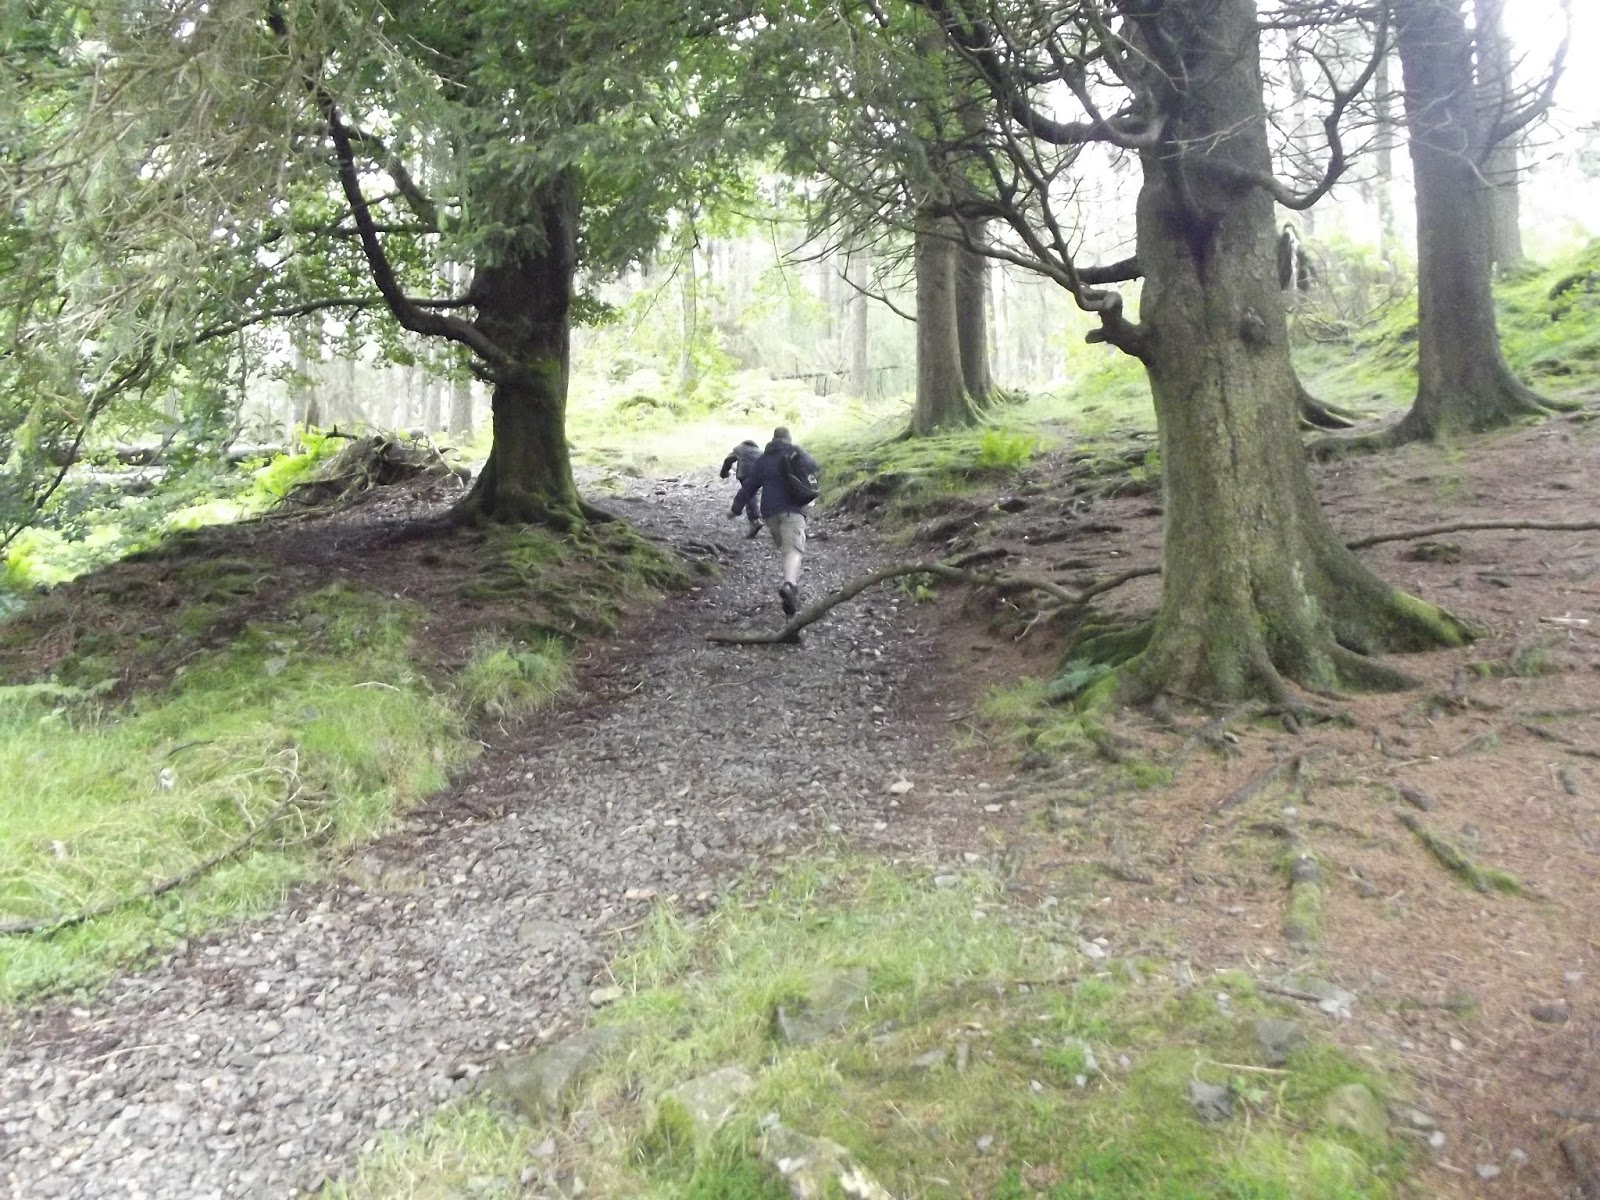 two people walking through the woods